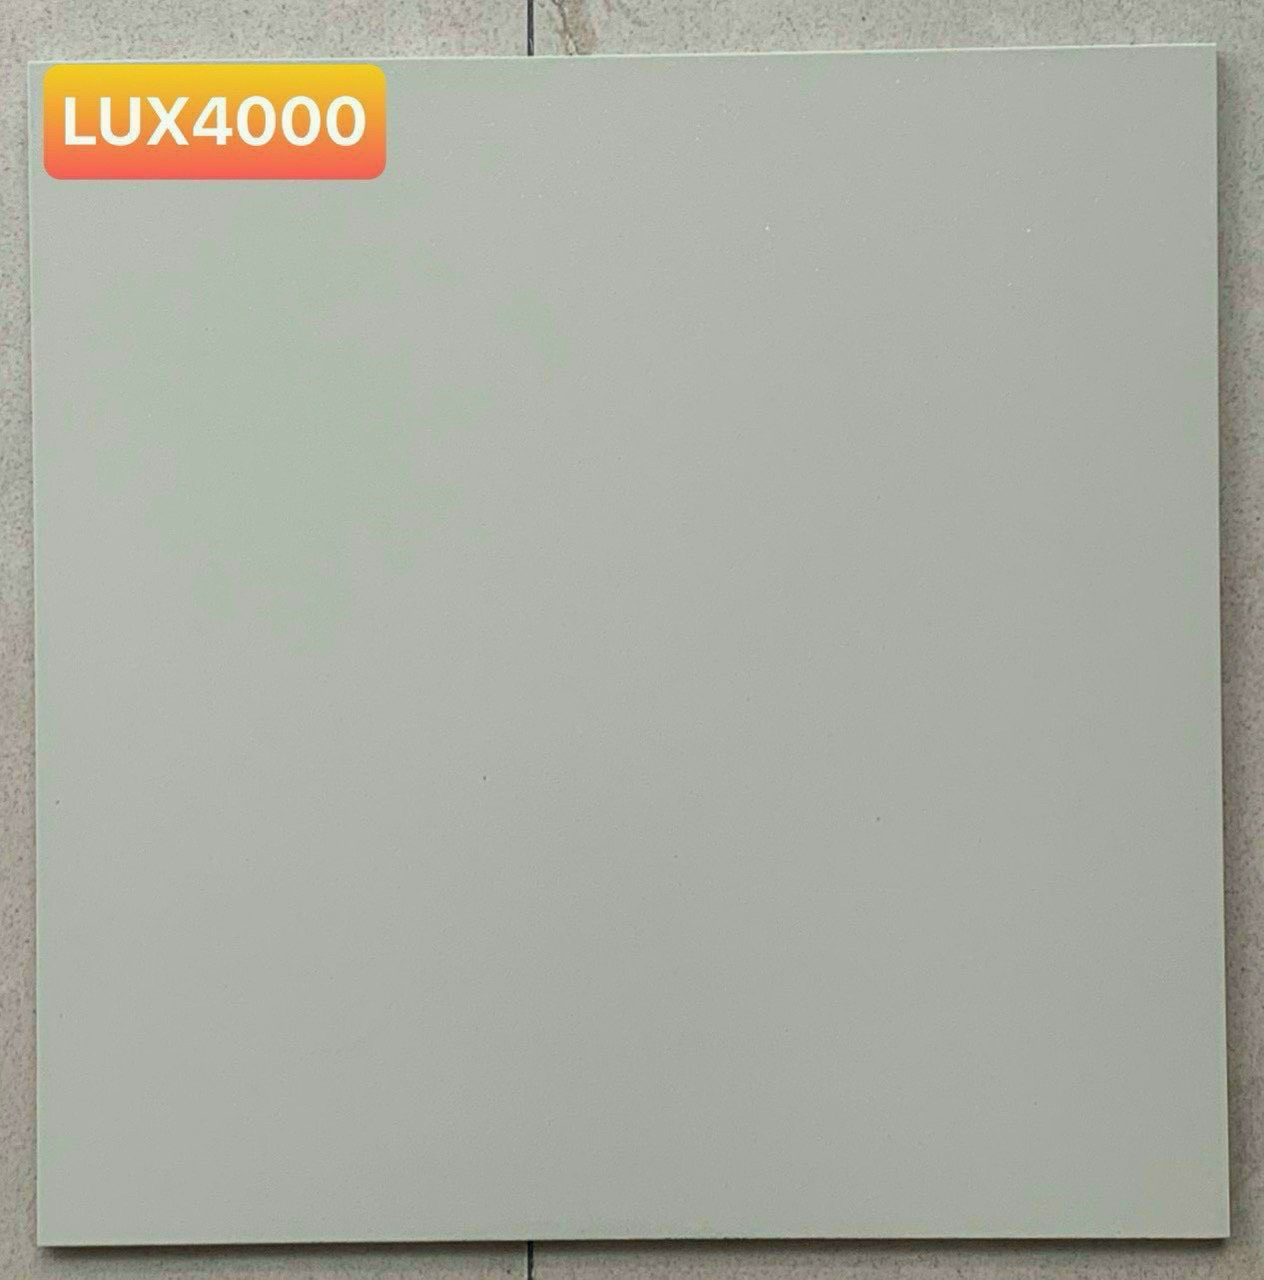 Fico Lux 4000